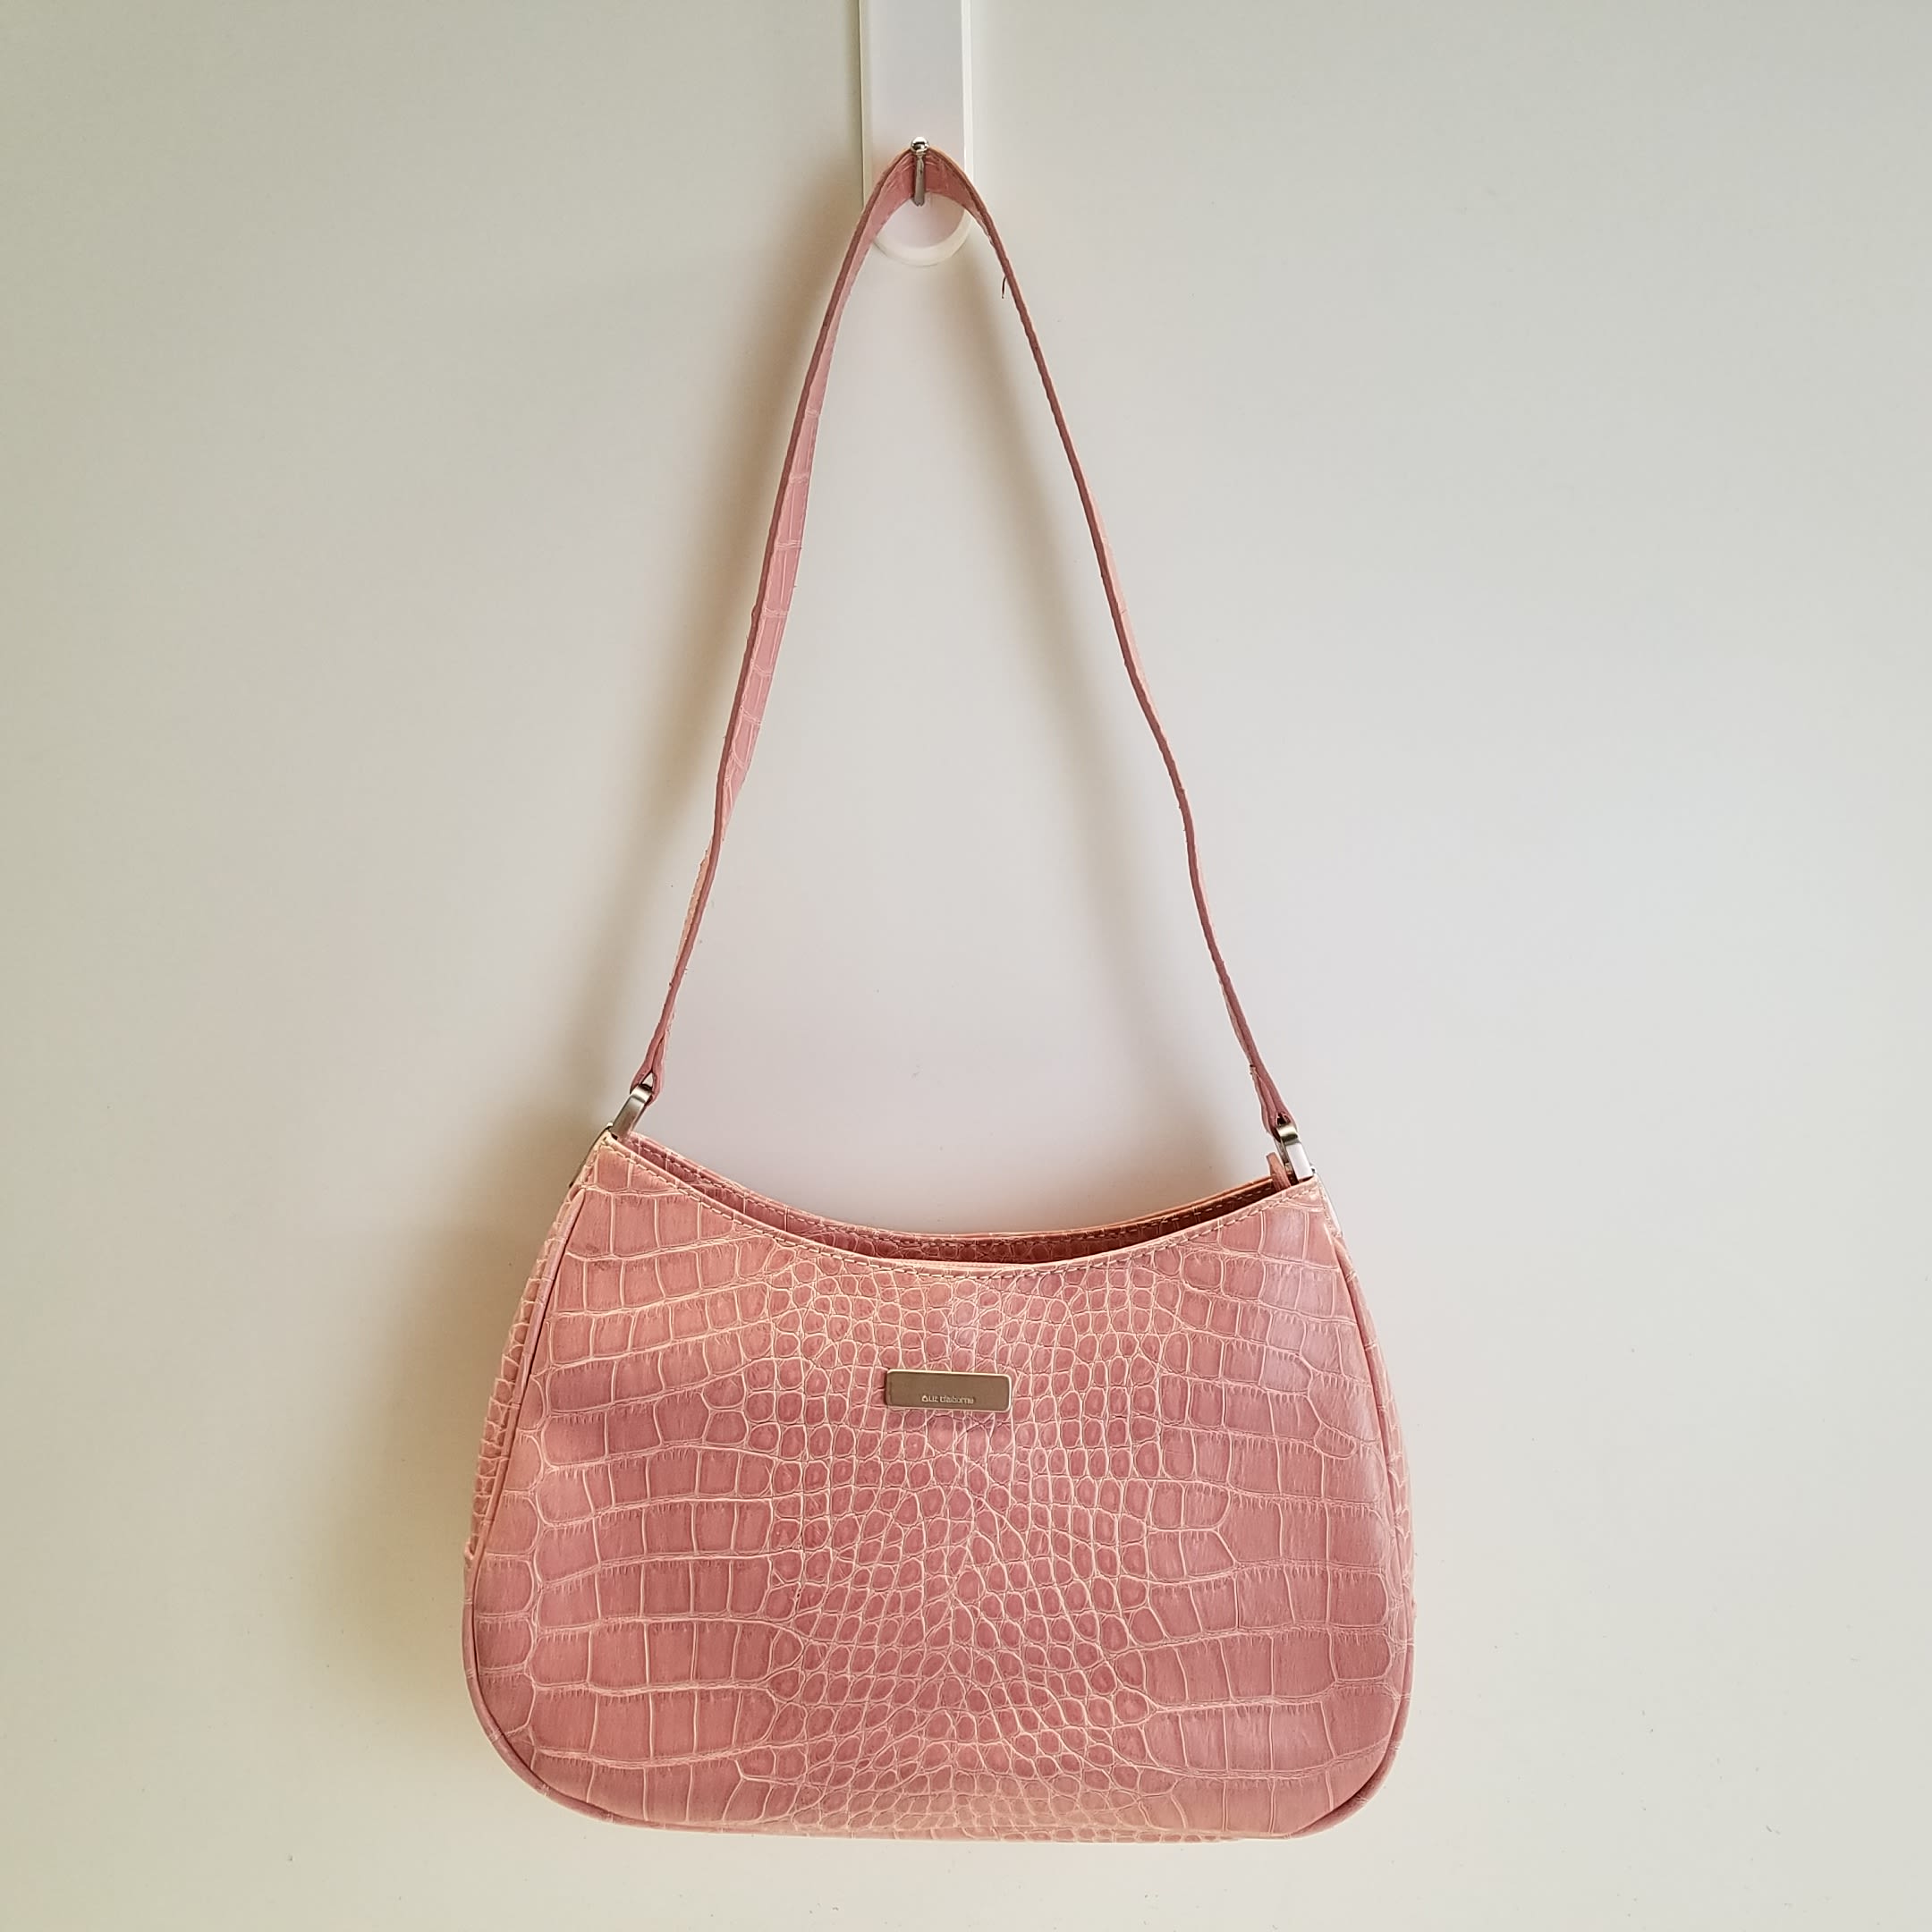 Juicy Couture Vintage Hobo Bag – Fred & Lala's Finds